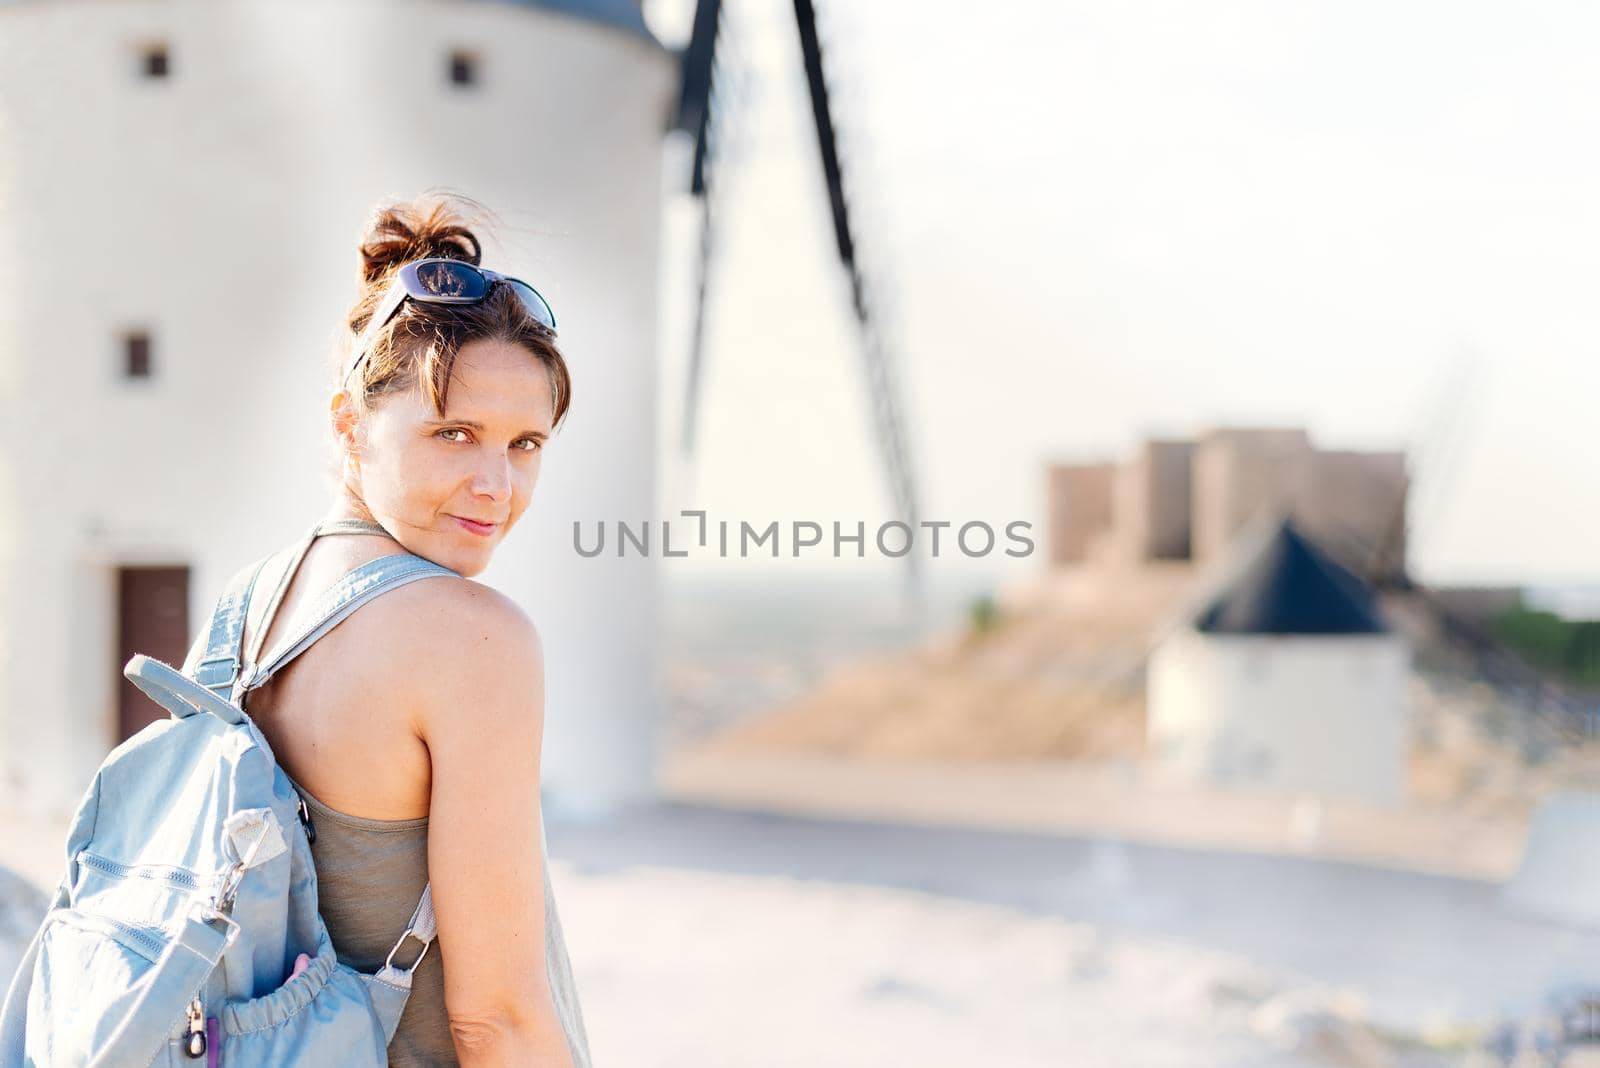 Selective focus on a young woman turning to face the camera standing next to restored ancient windmills and a medieval castle.